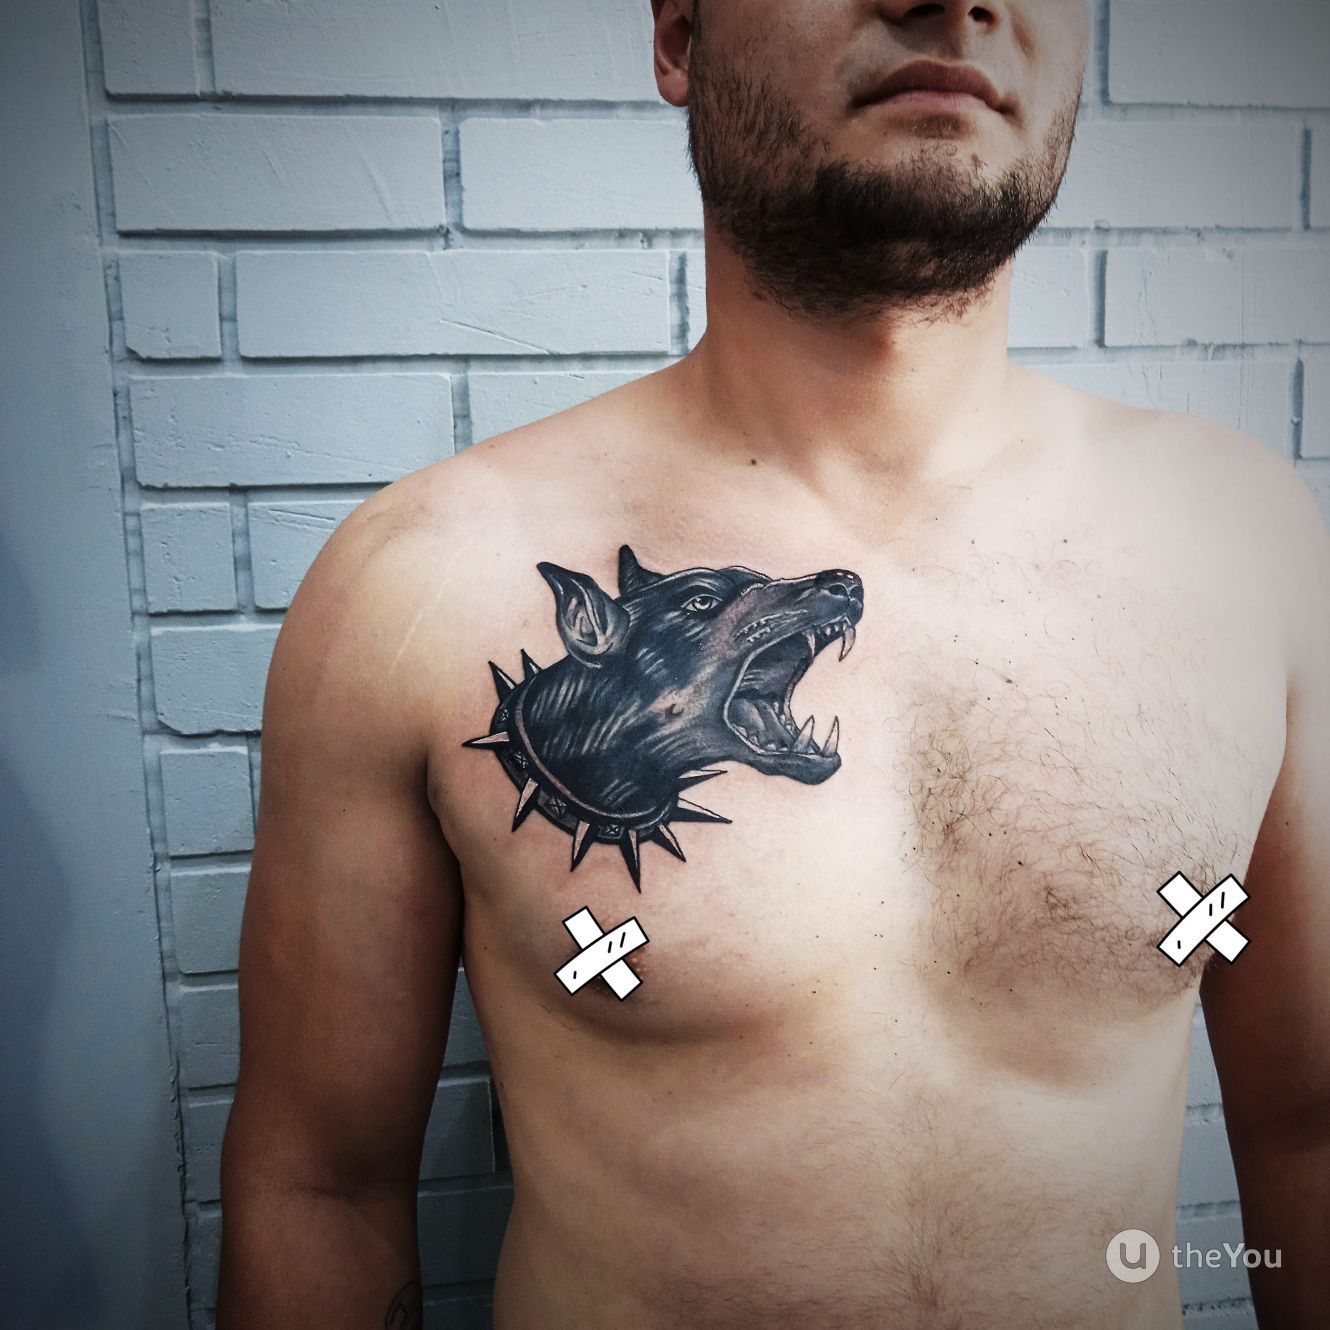 Chest Tattoos for Men - Finding the Tattoo That's Right for You